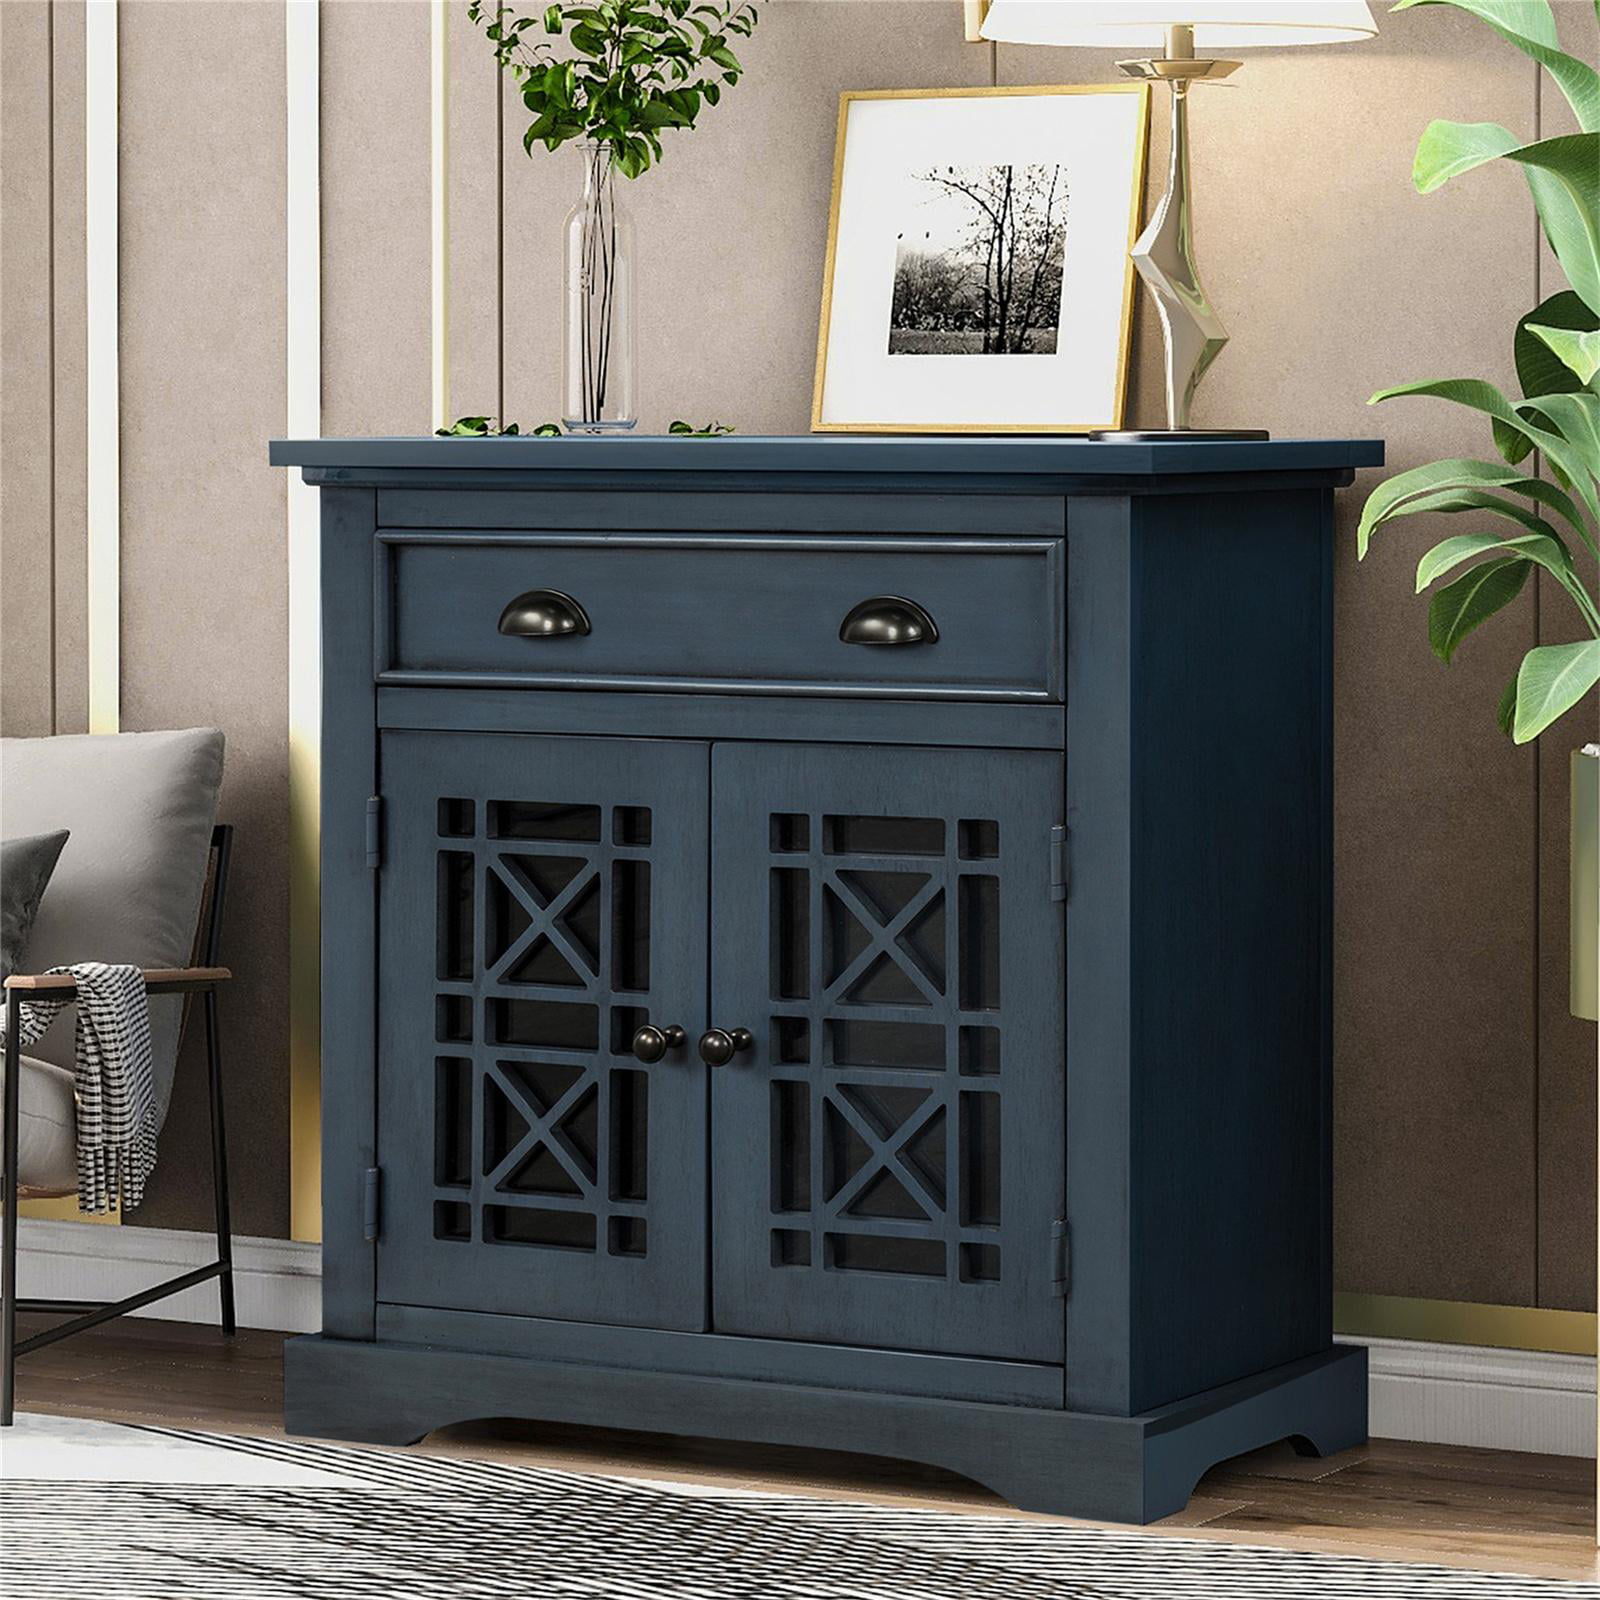 Rectangular Storage Cabinet, Console Sofa Table wih Cabinet and Big